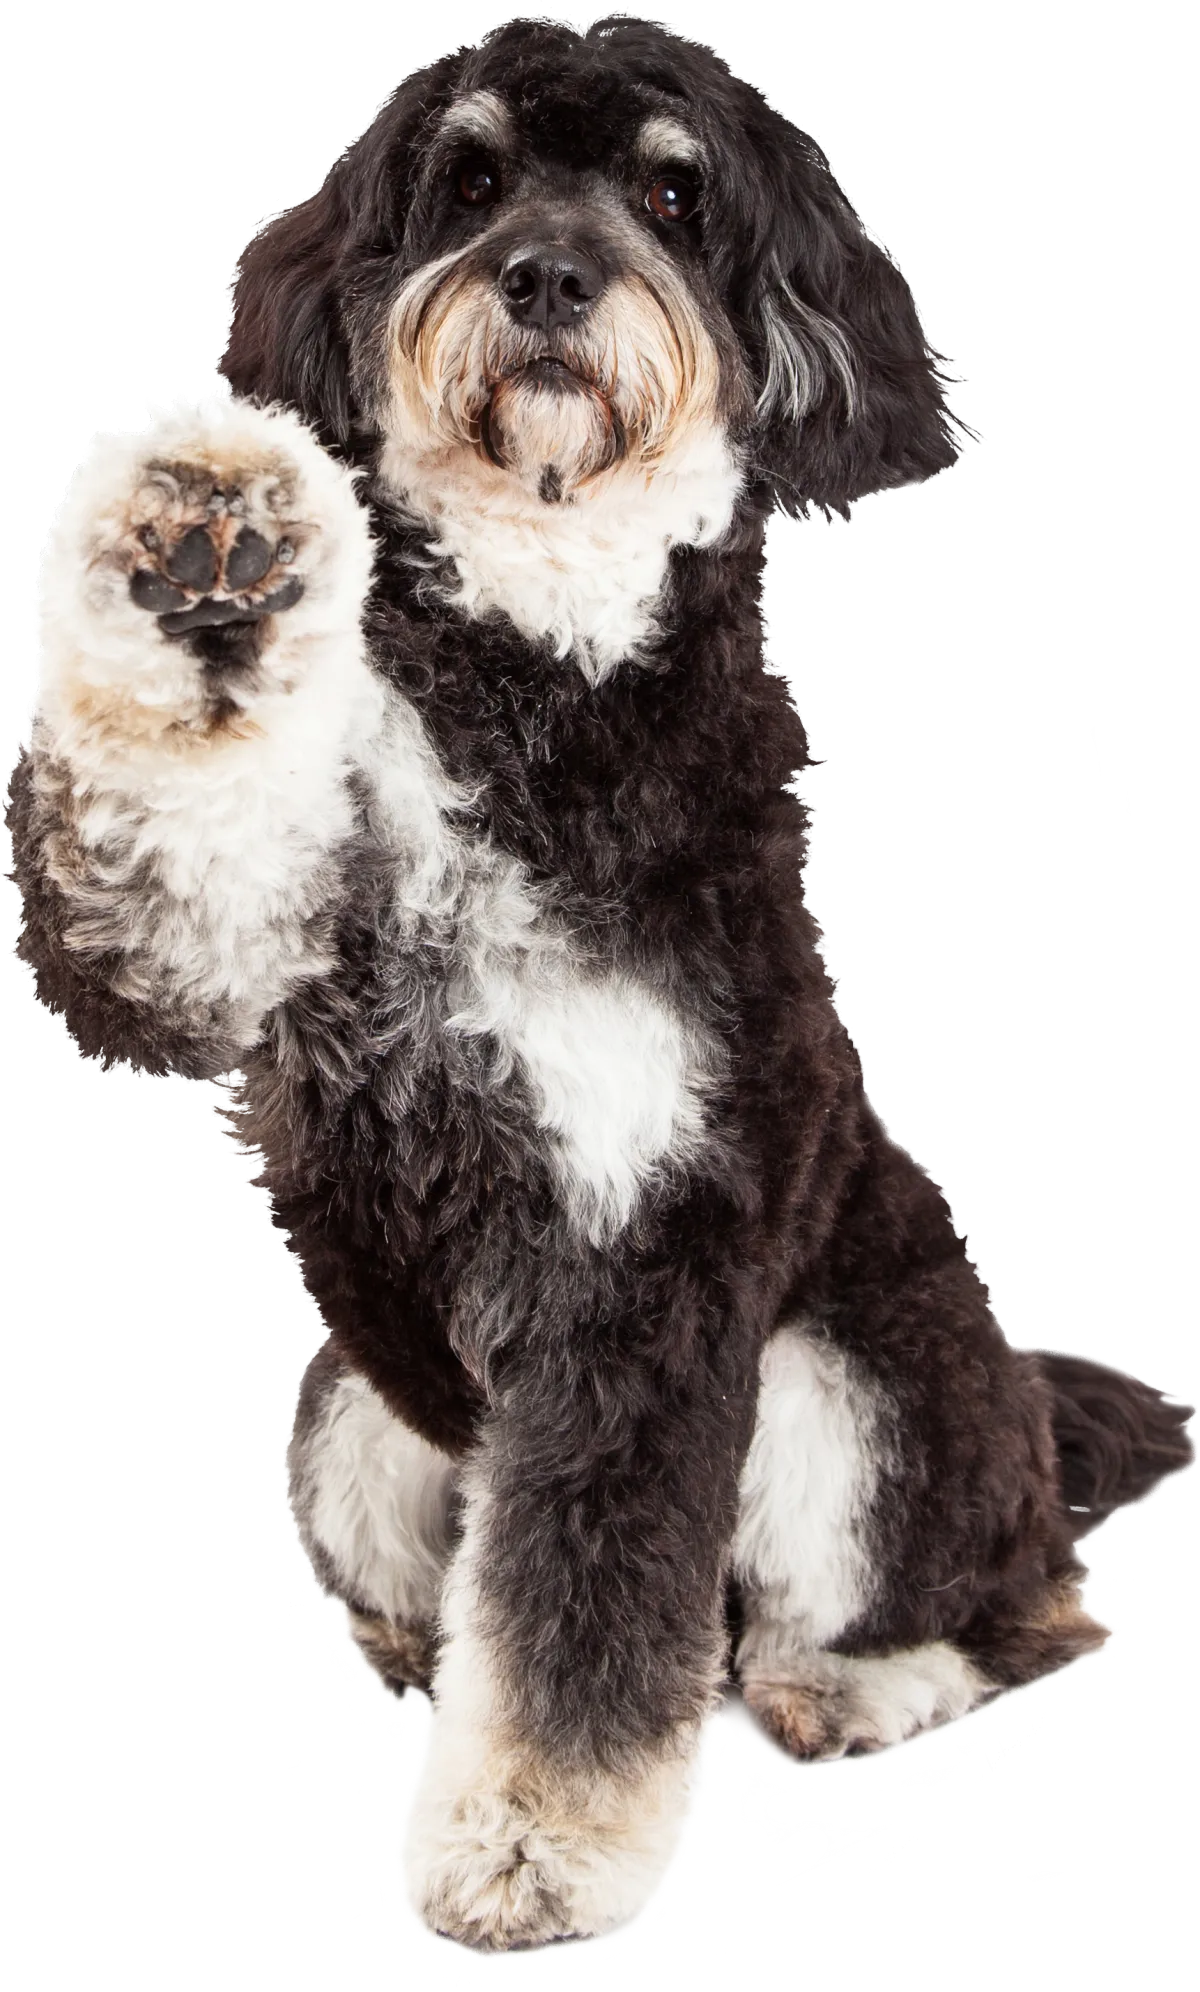 A tri-colored poodle mix offers his paw